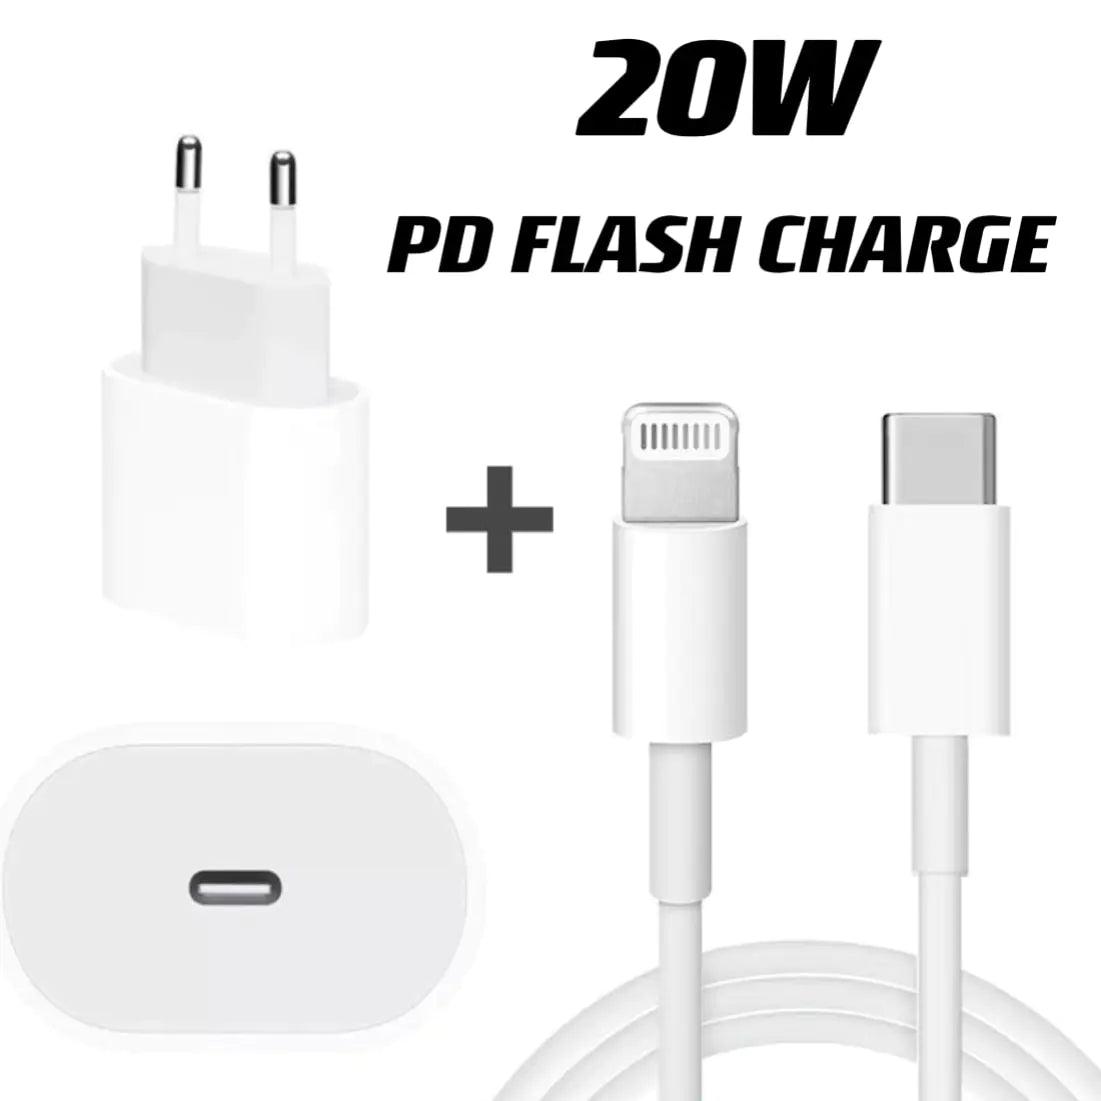 20W USB-C Power Adapter and Cord for iPhone - ACO Marketplace